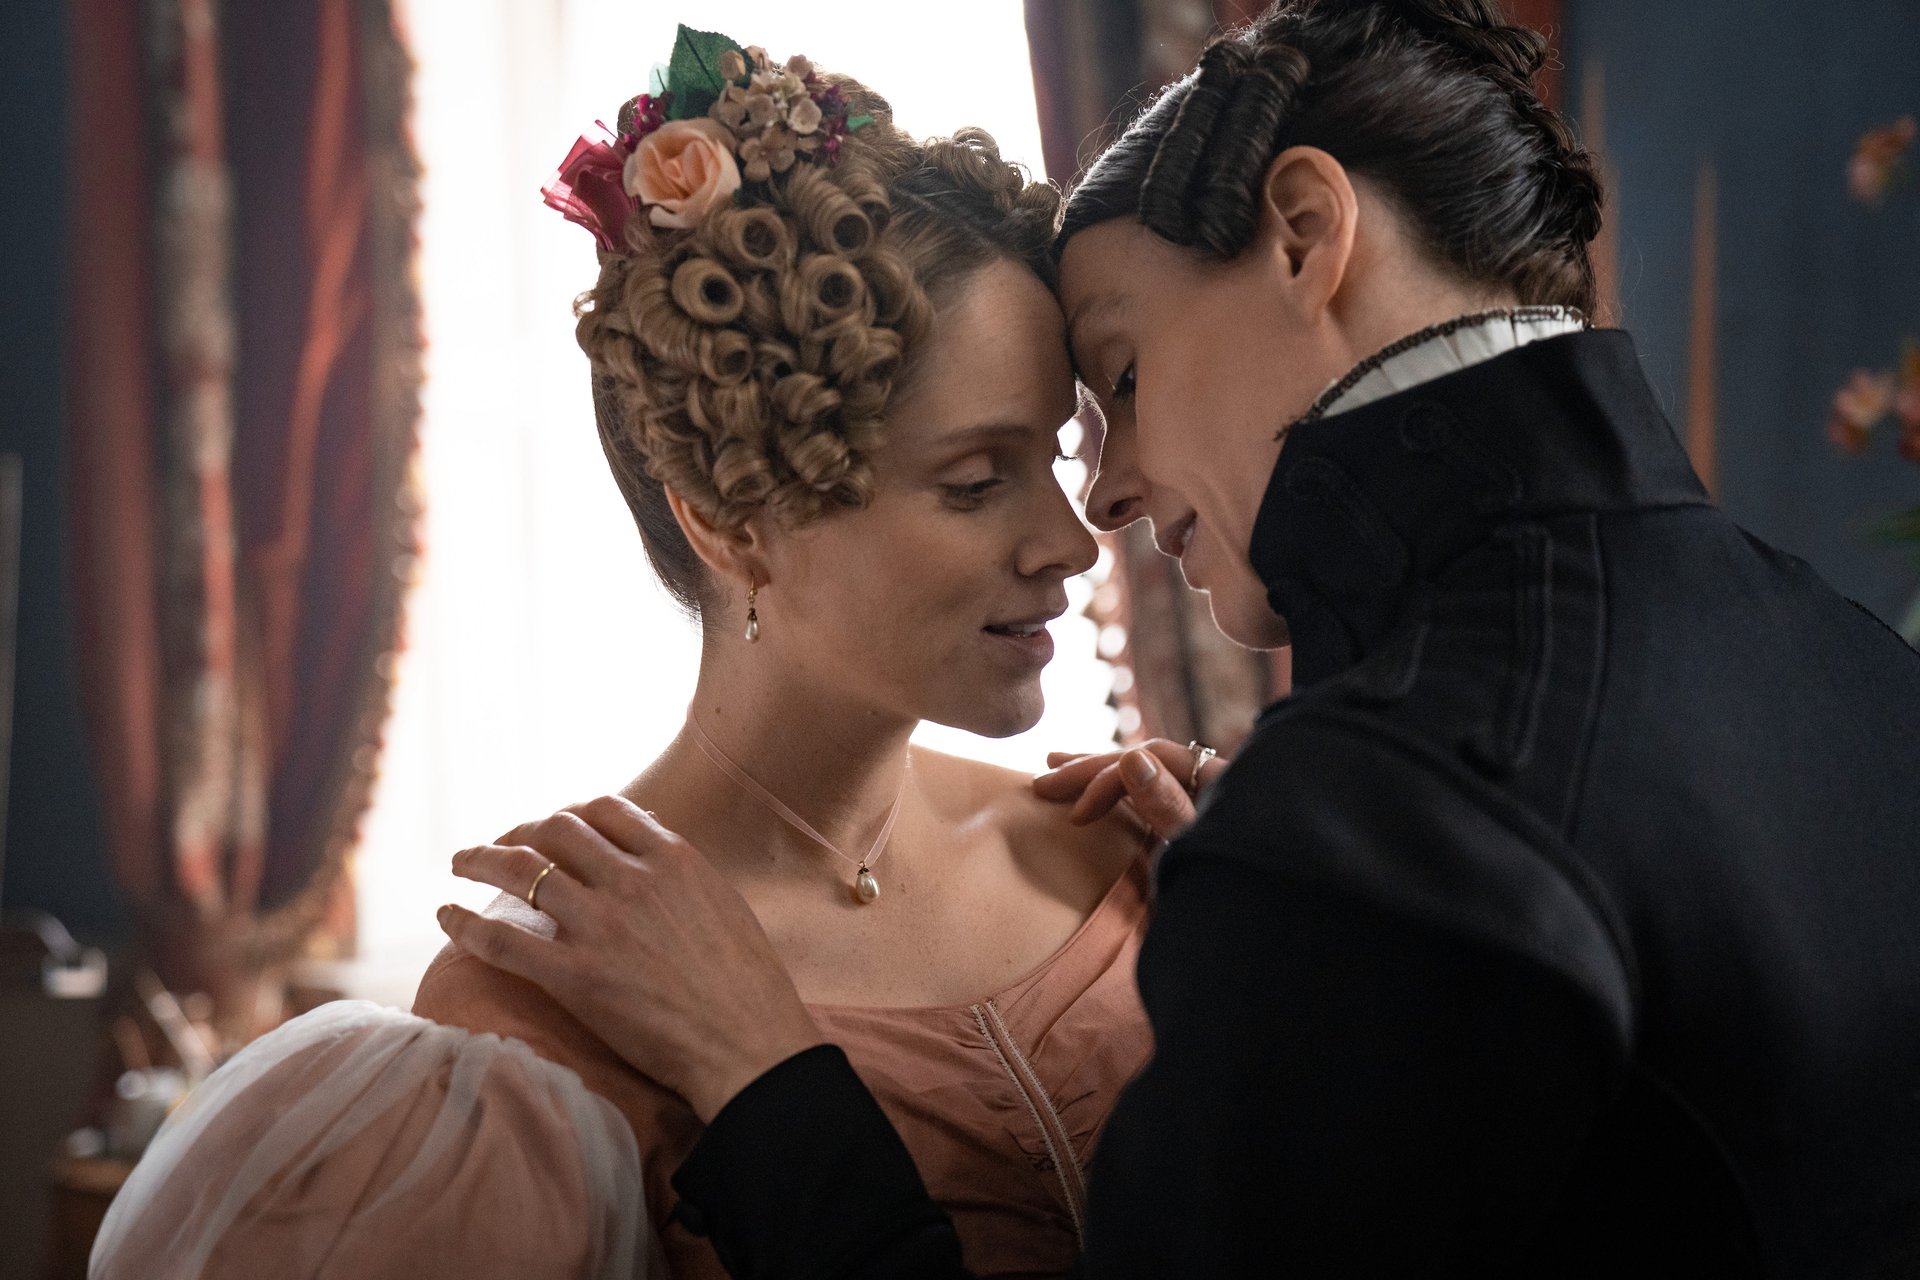 Anne leaning in to kiss Ann in the recently canceled HBO series 'Gentleman Jack'